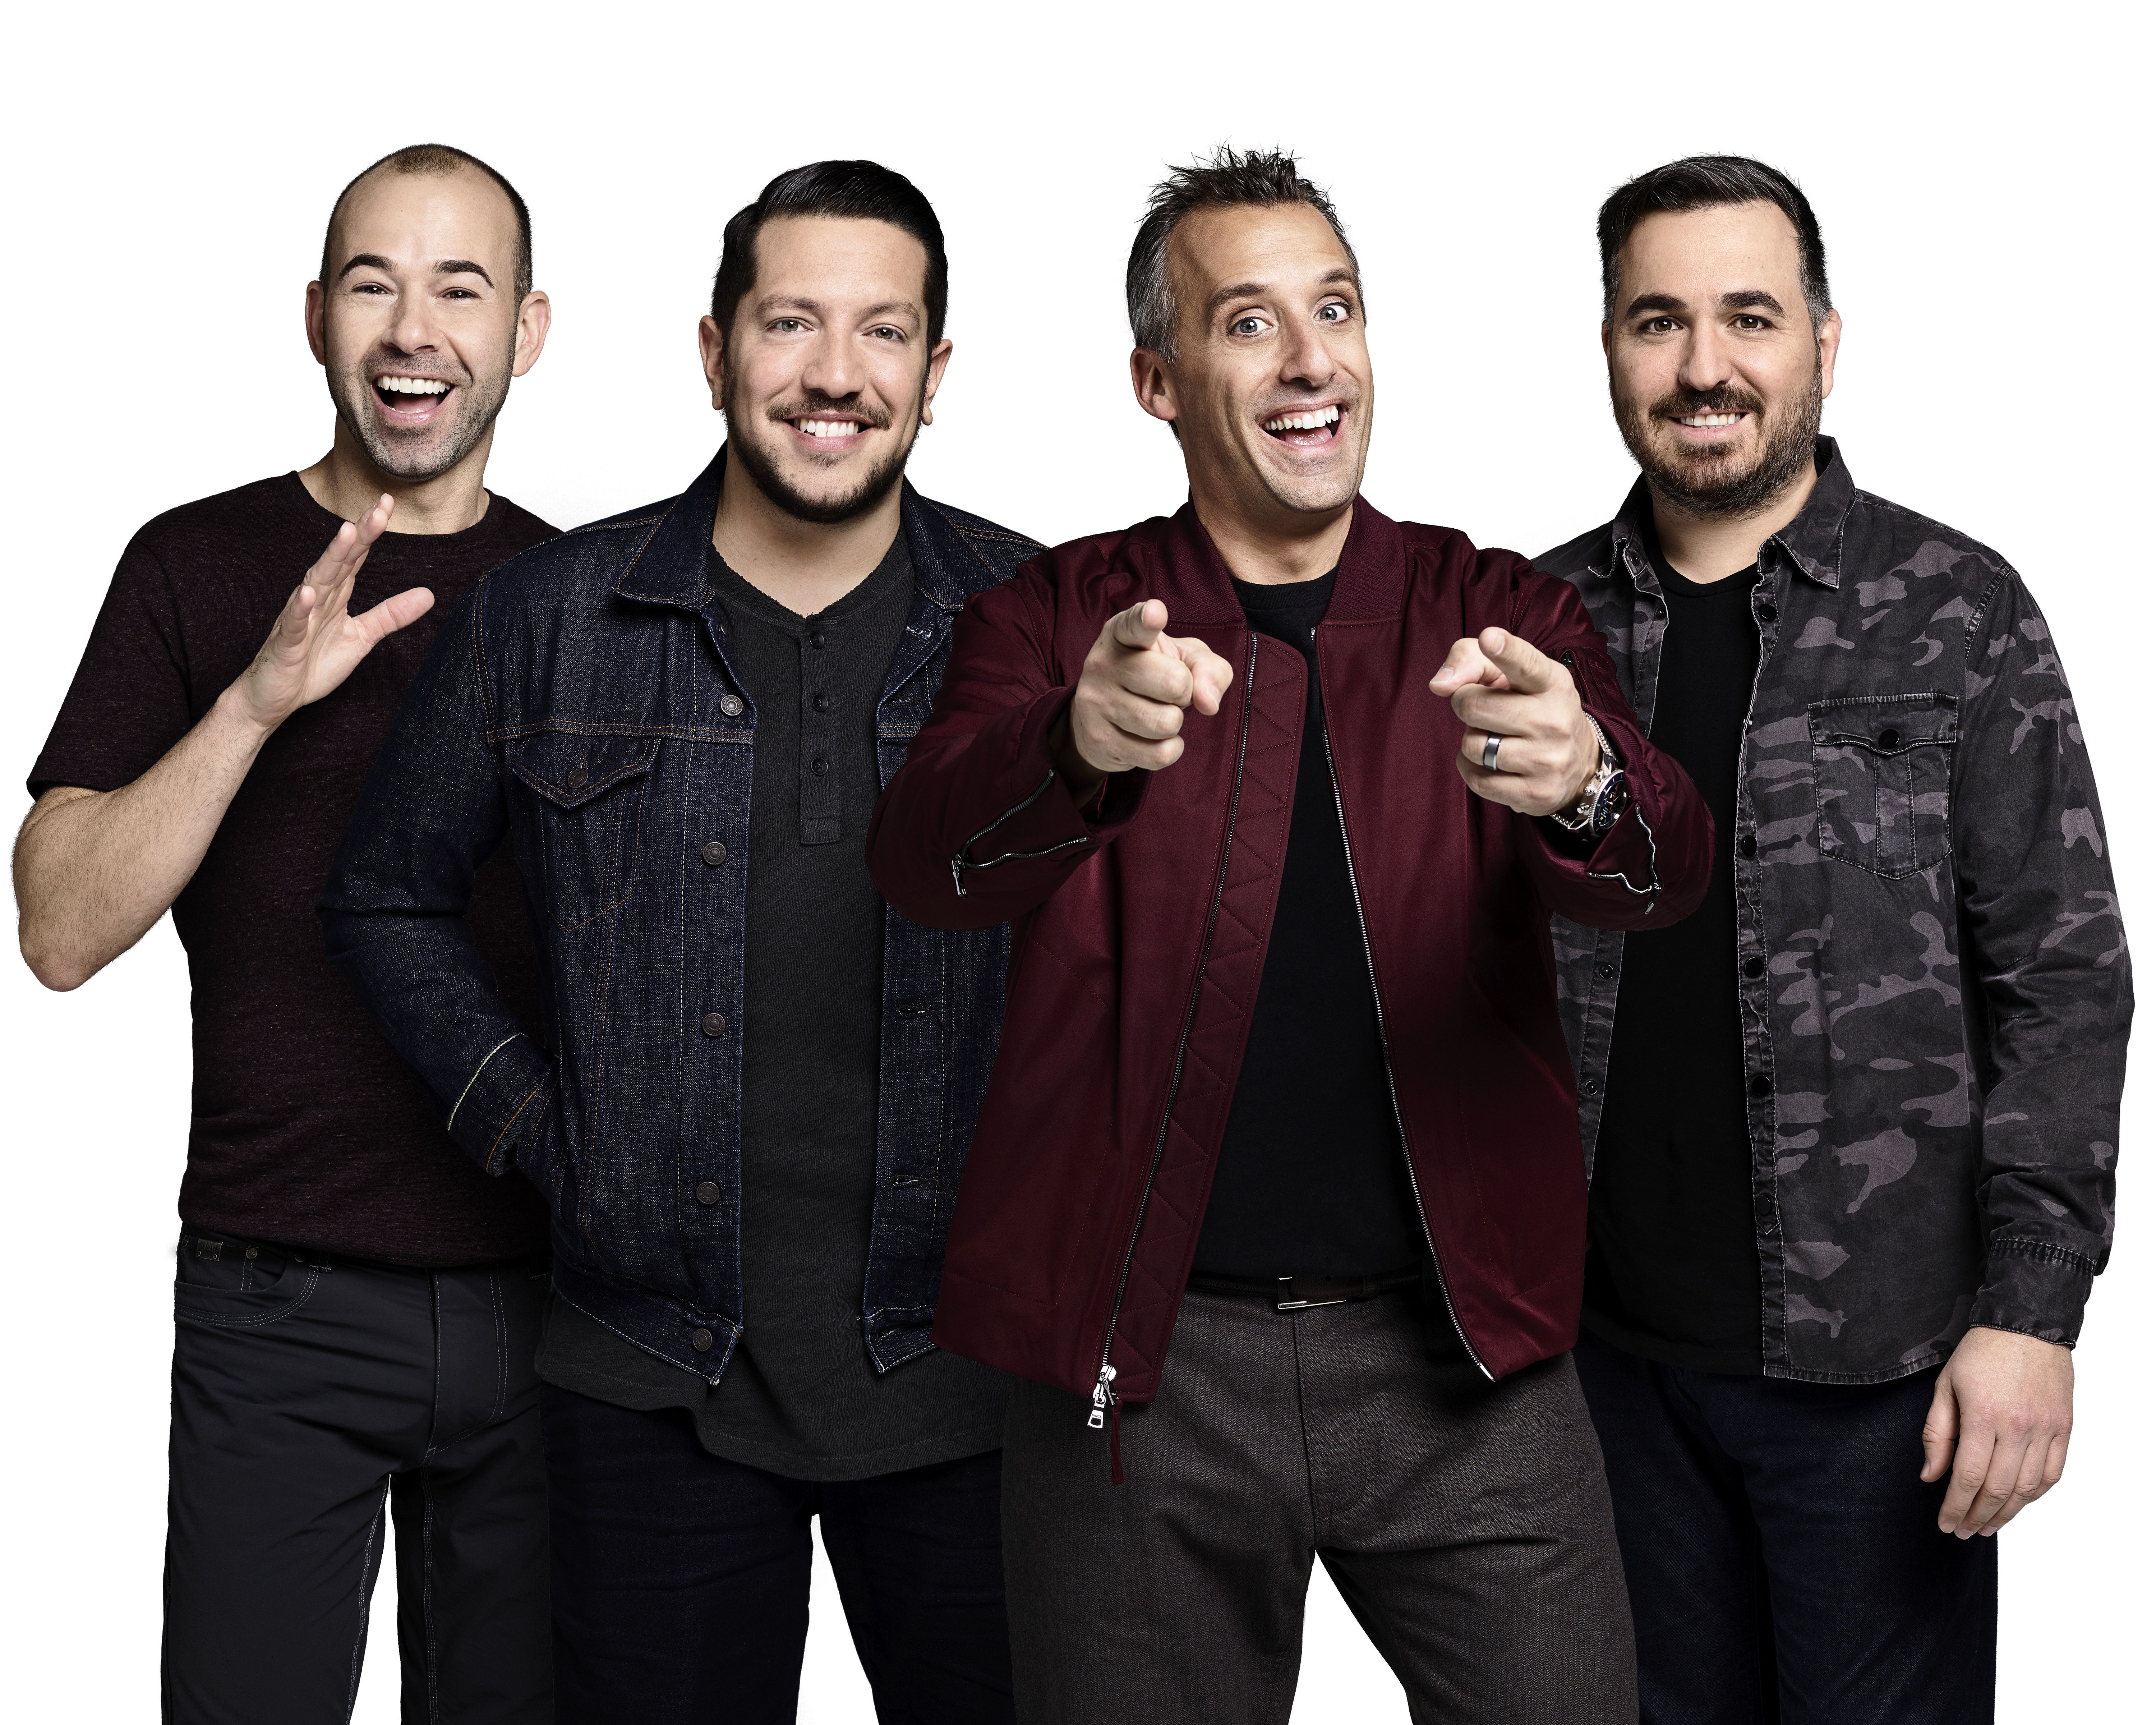 Impractical Jokers' 2020. How to watch, live stream, TV channel